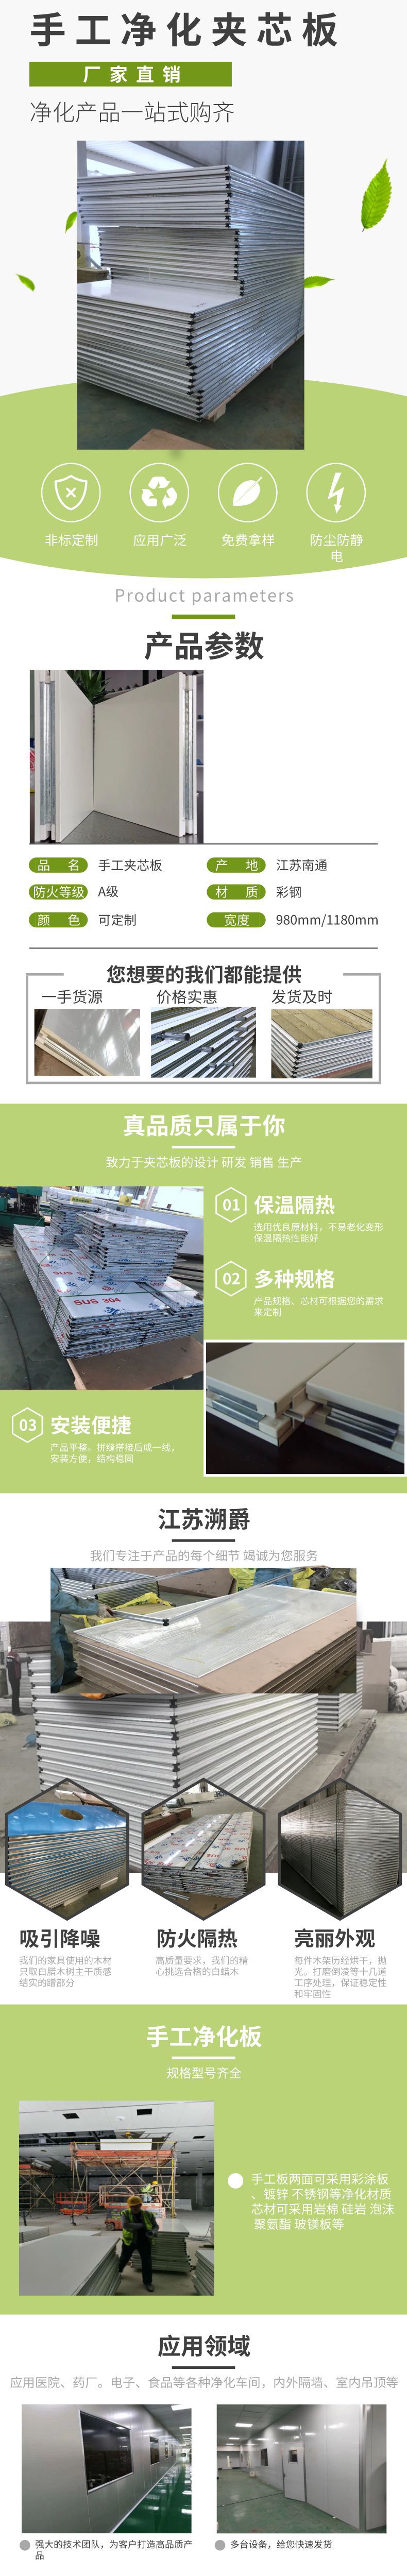 Sujue Color Steel Rock Wool Sandwich Panel 1180 Composite Purification Manual Panel Partition Ceiling Installation